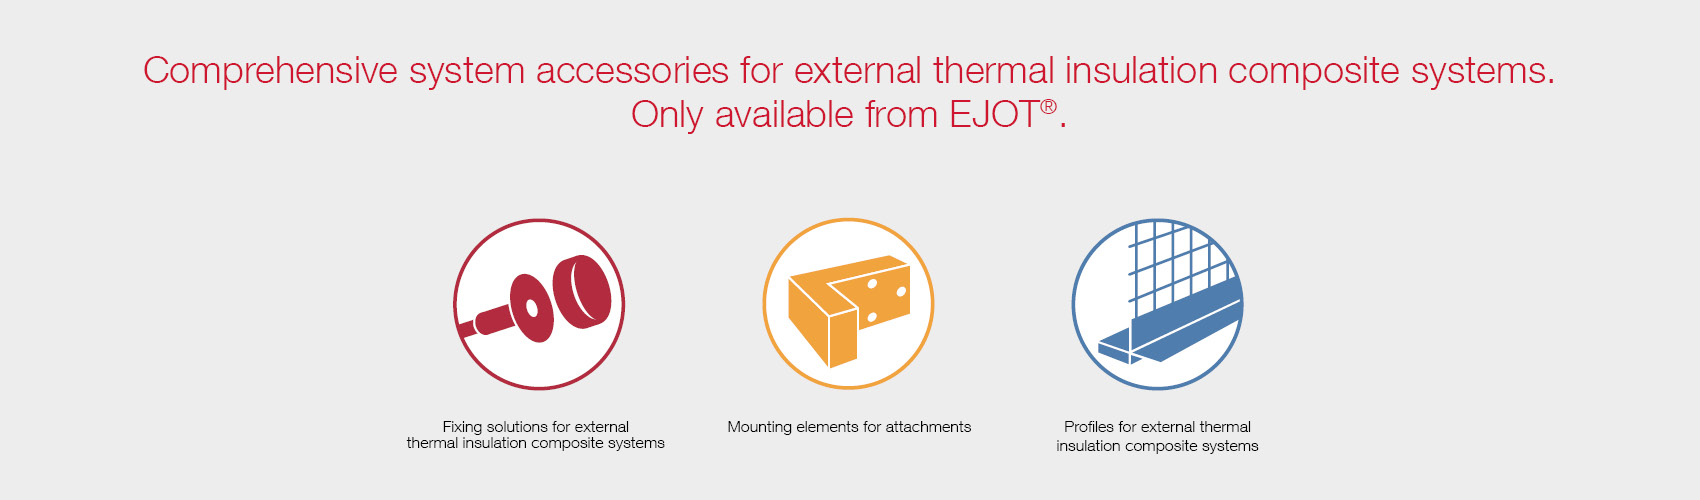 Comprehensive system accessories for external thermal insulation composite systems. Only available from EJOT®.